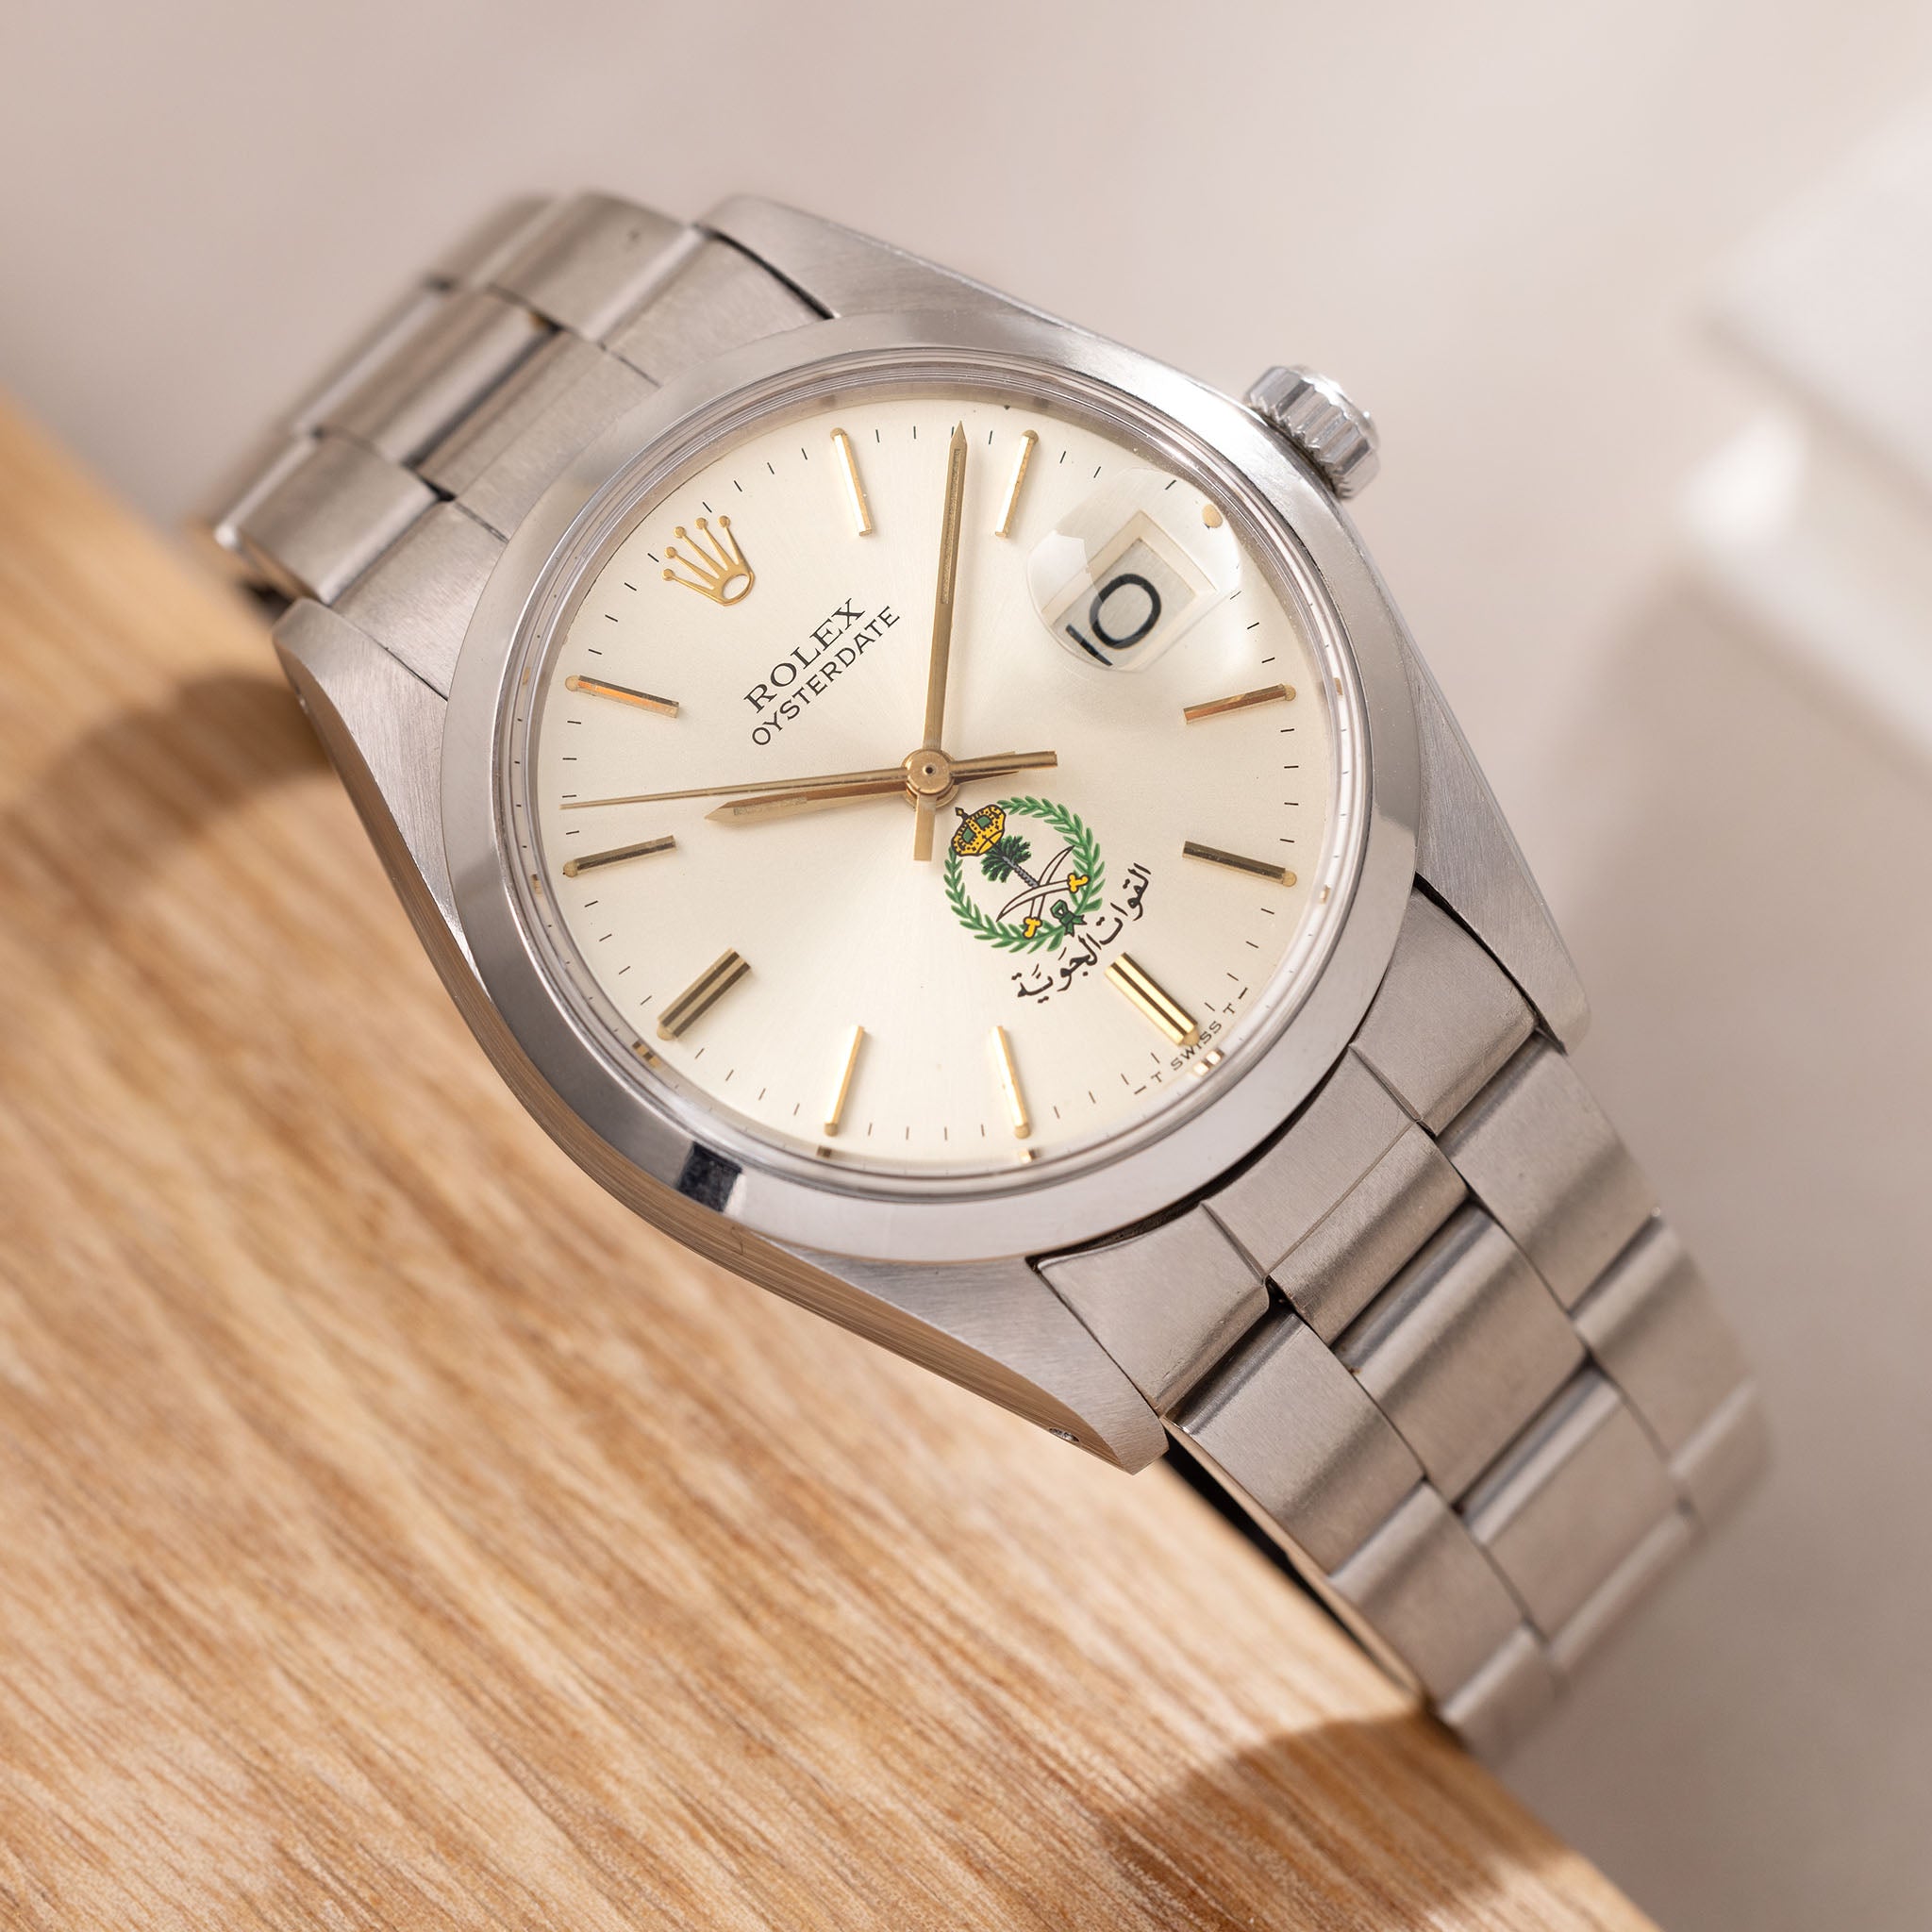 Rolex Oysterdate Precision "Royal Saudi Armed Forces" Referenz 6694